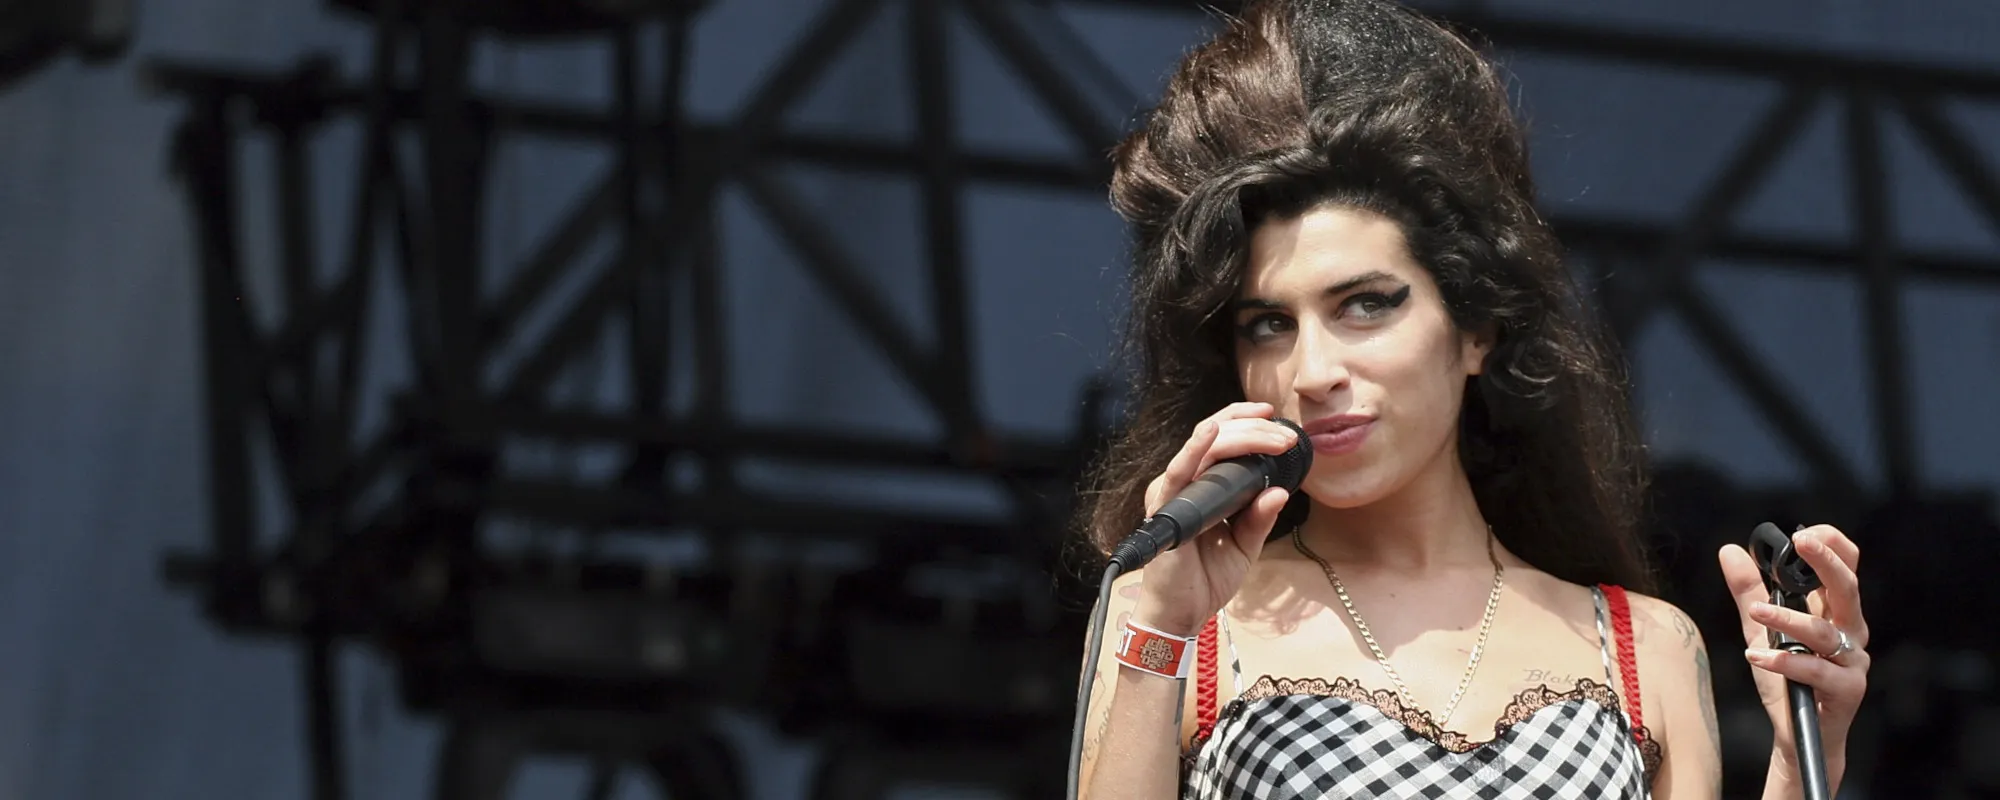 The Surprising Meaning Behind Amy Winehouse’s Groovy Hit “Valerie”